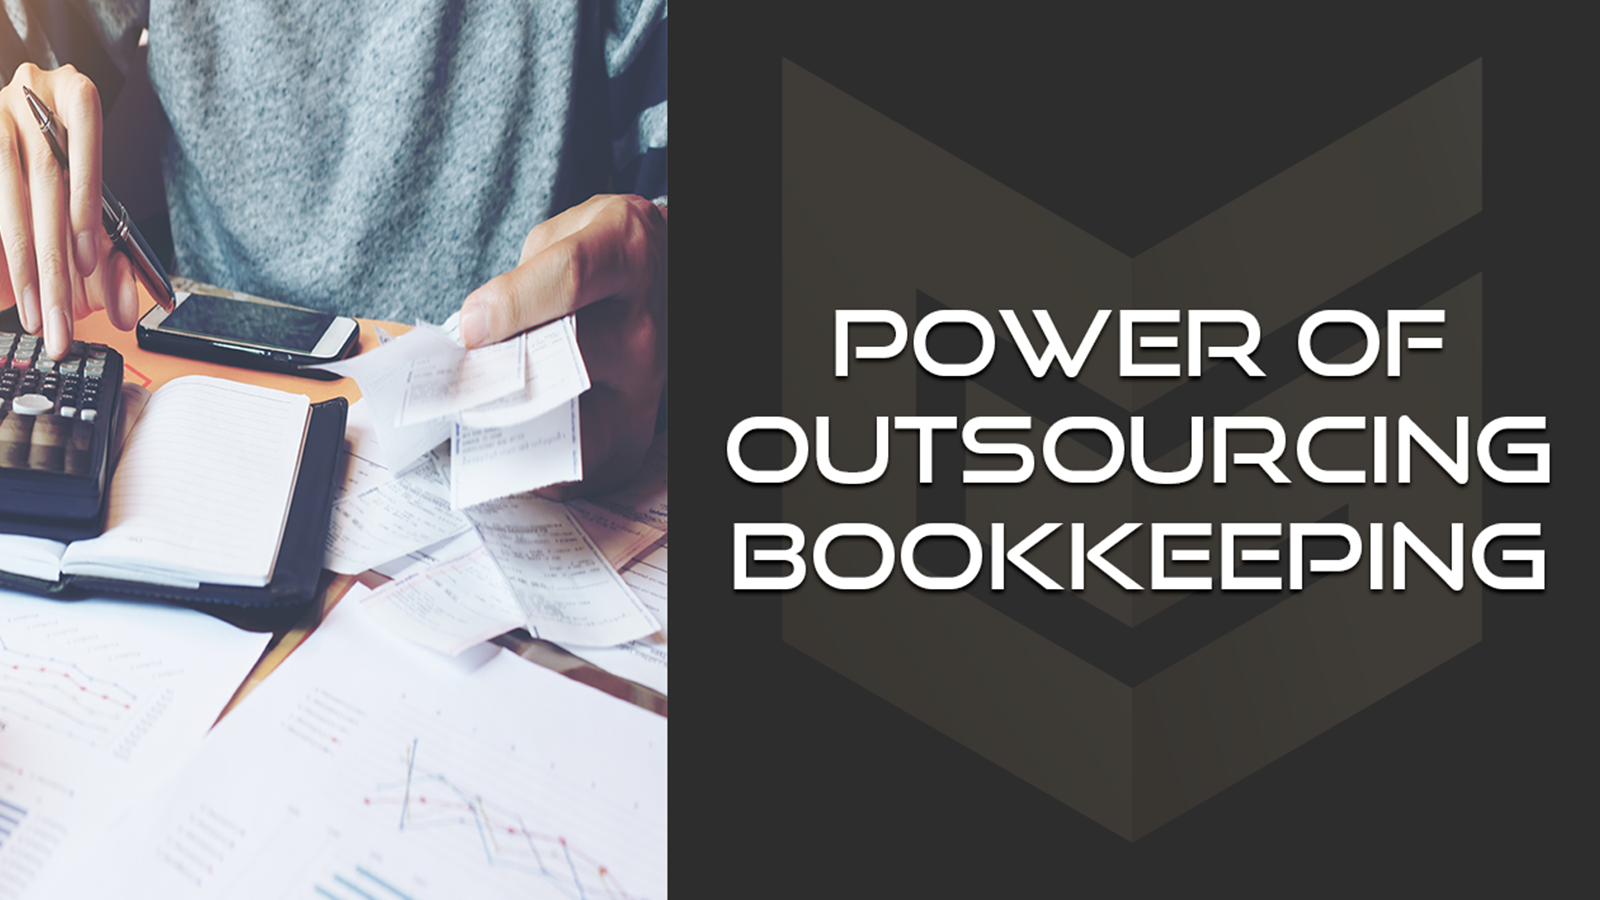 Image with text Power of Outsourcing Bookkeeping